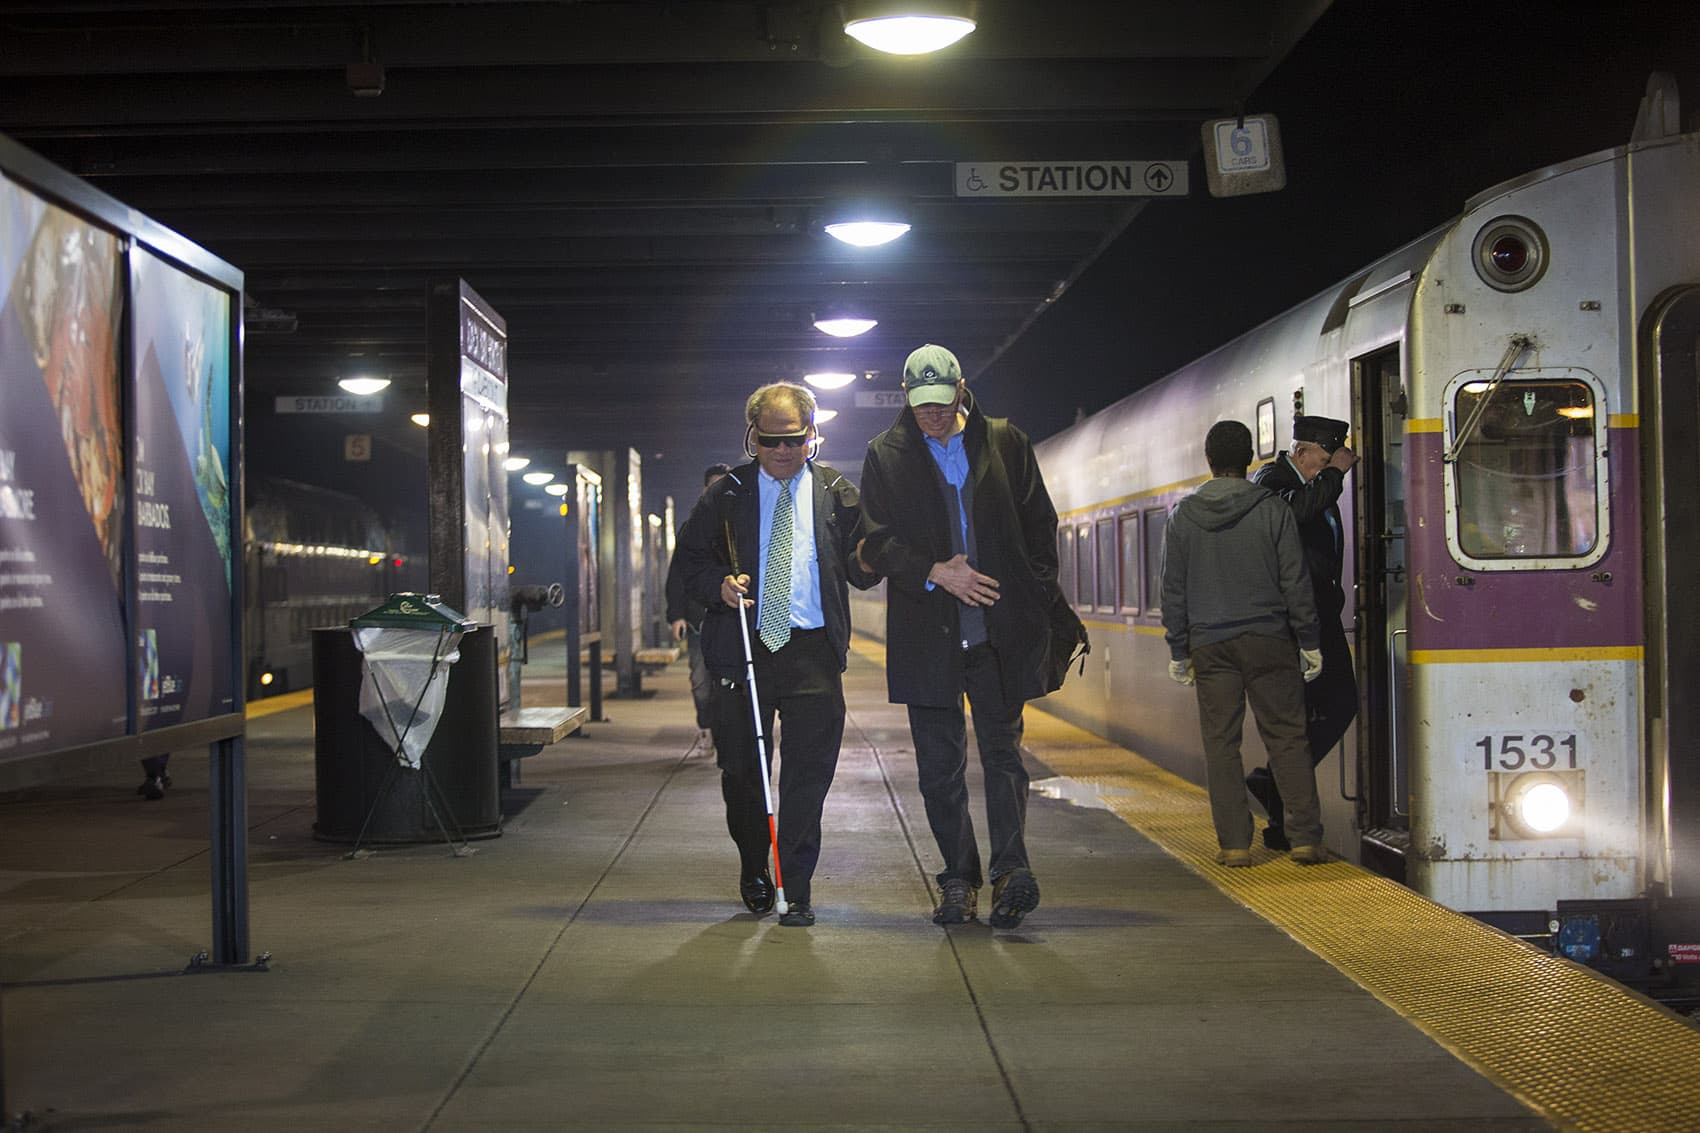 Whenever they're on the same commuter rail train, David Hill, right, meets Blair Wong on the platform at Back Bay station and walks him to Benjamin Franklin Institute of Technology. (Jesse Costa/WBUR)